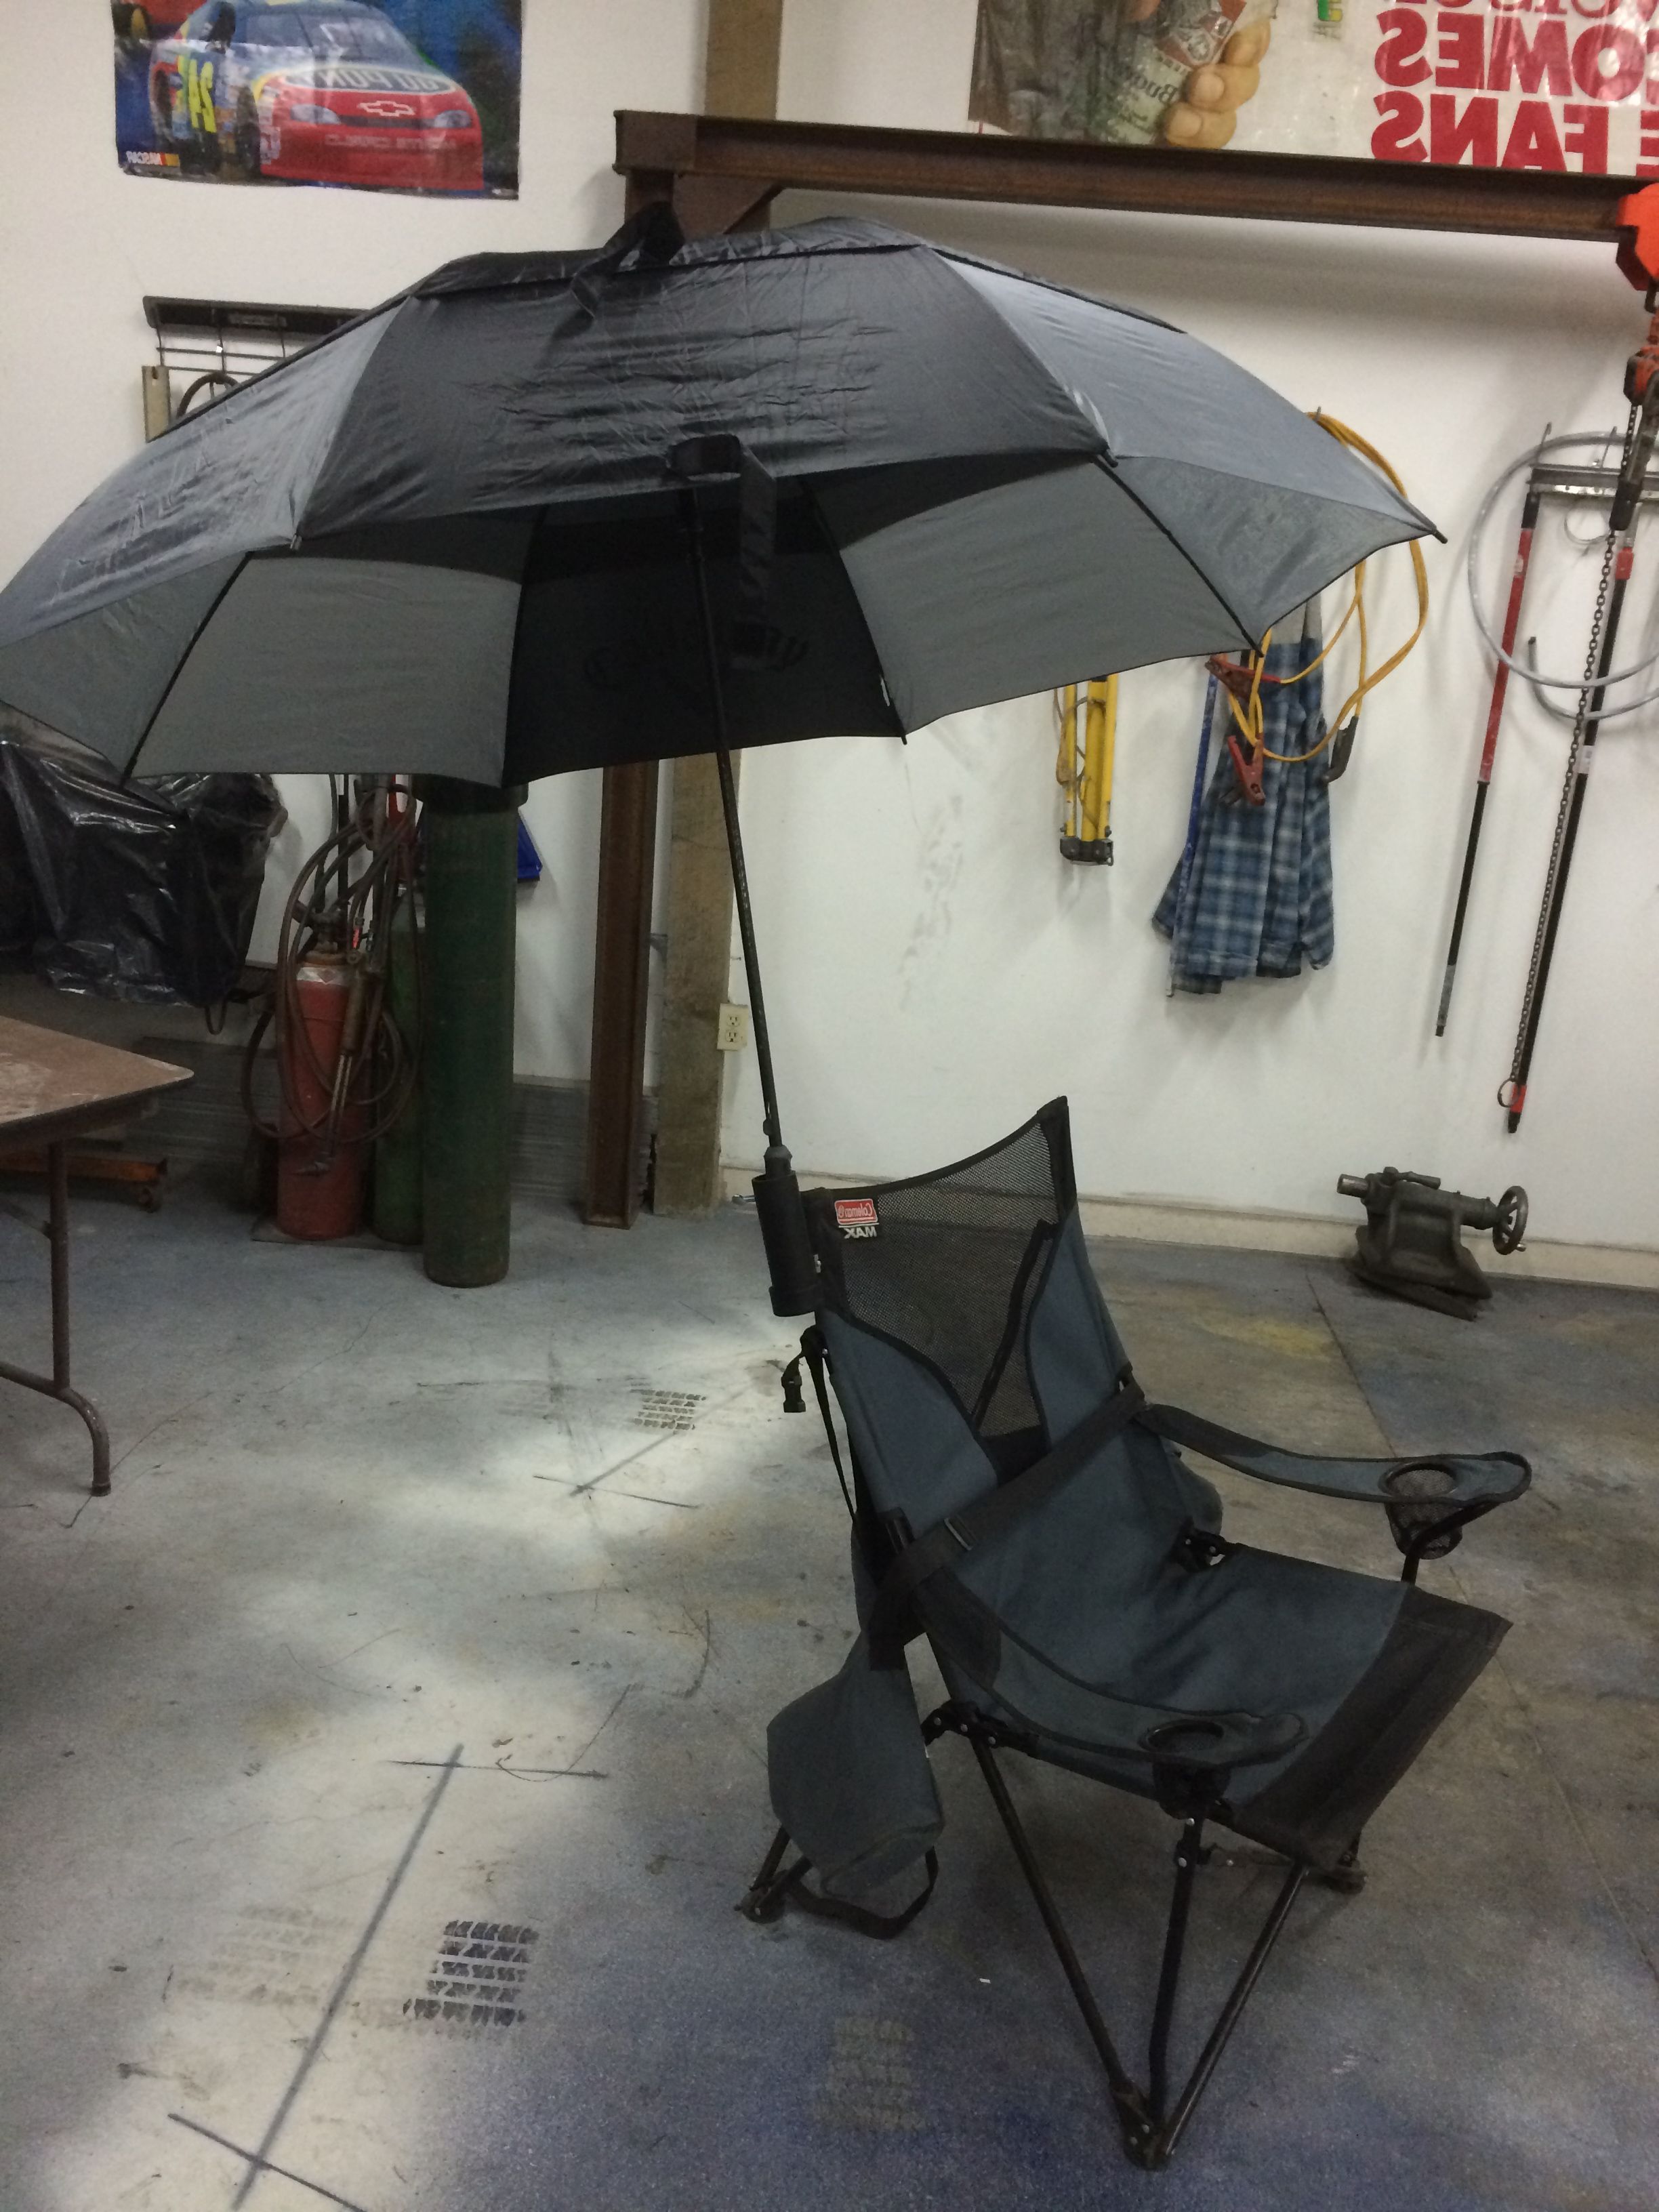 2019 Zeman Market Umbrellas Within Umbrella Holder Clamps To Most Chairs (View 17 of 20)